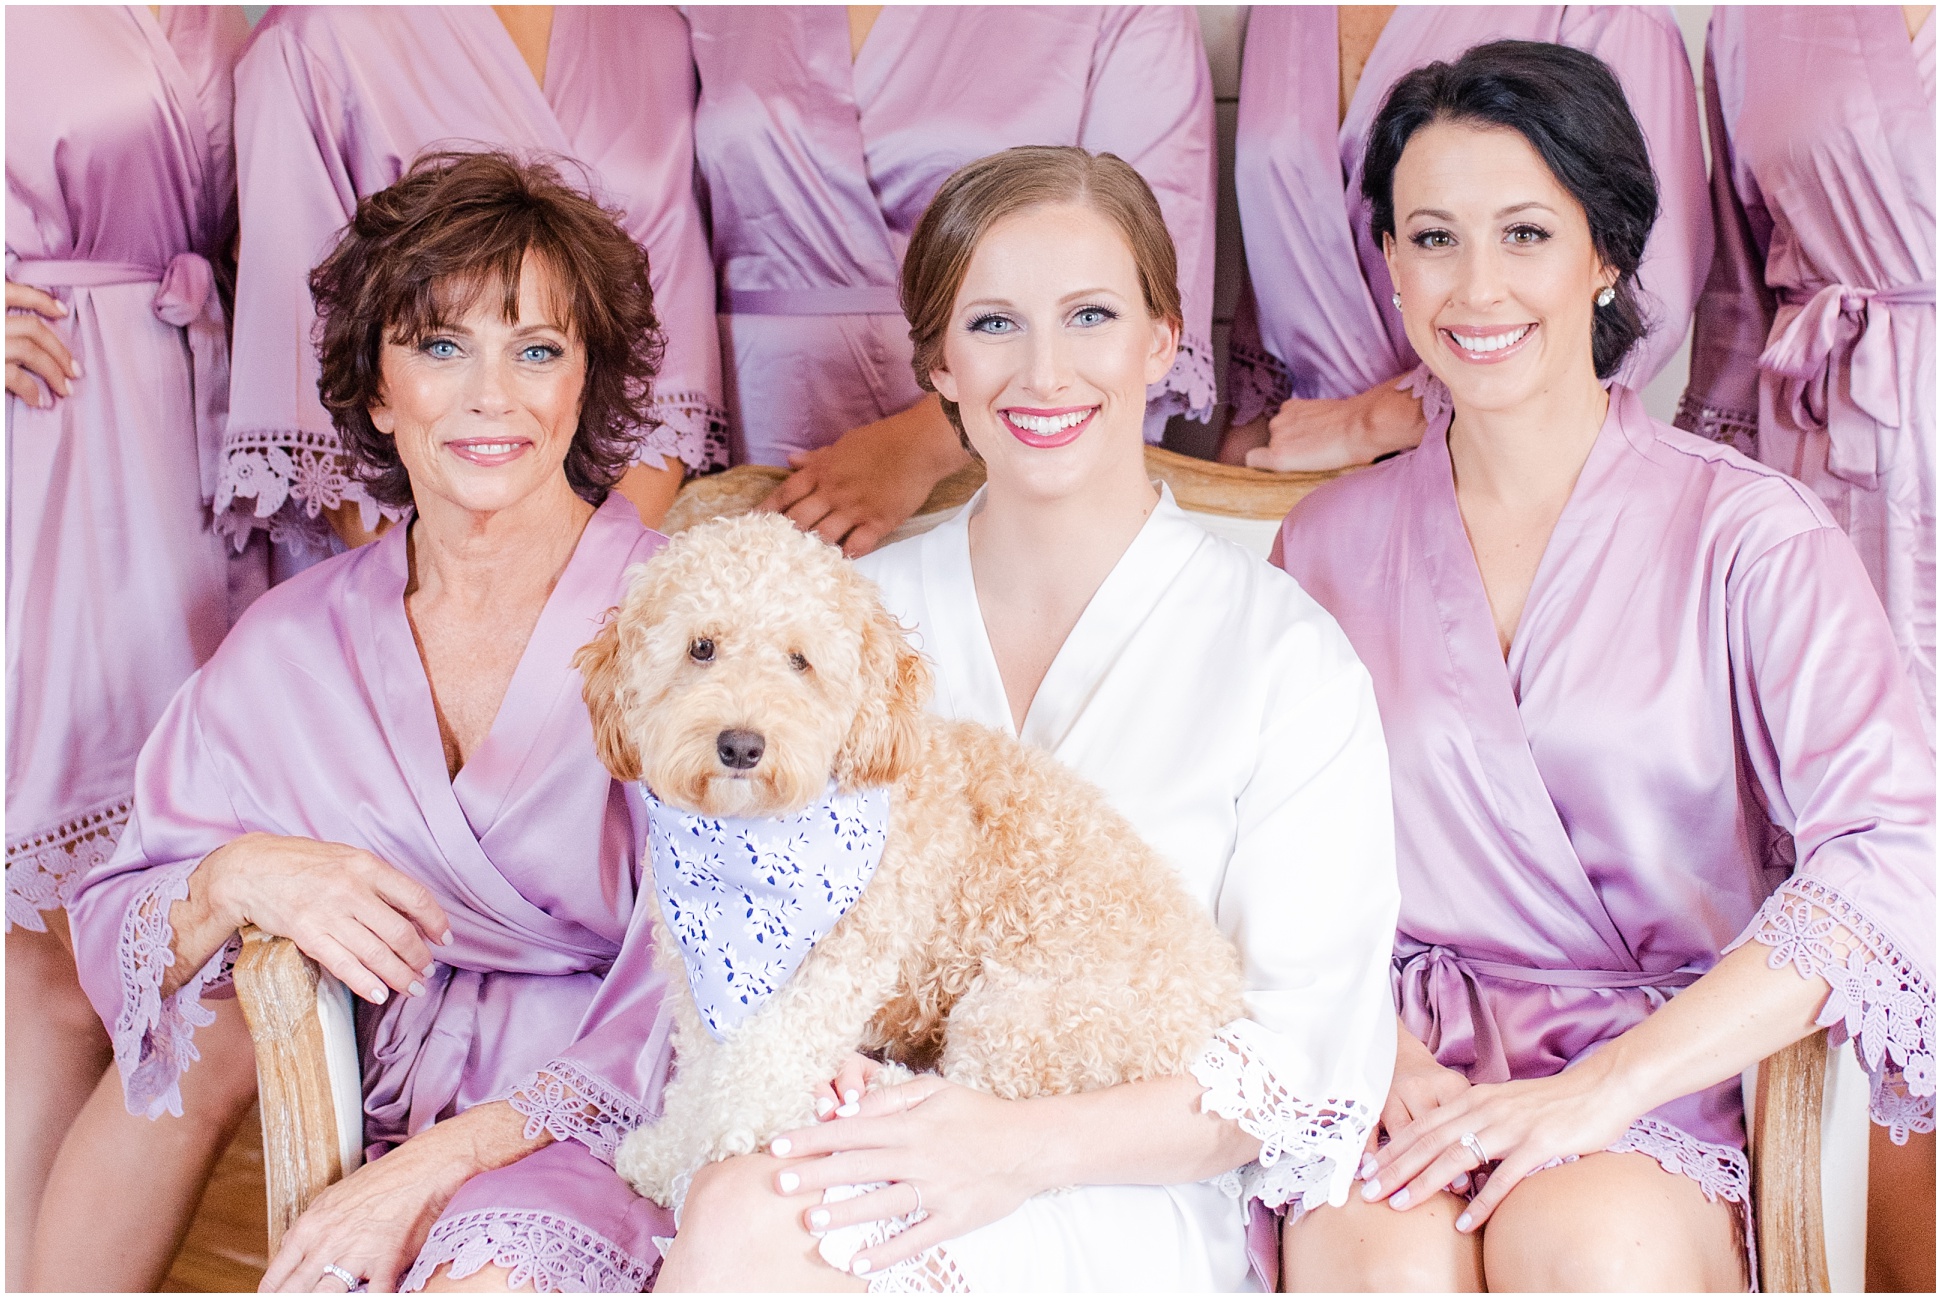 Bride, puppy, and bridal party in purple robes